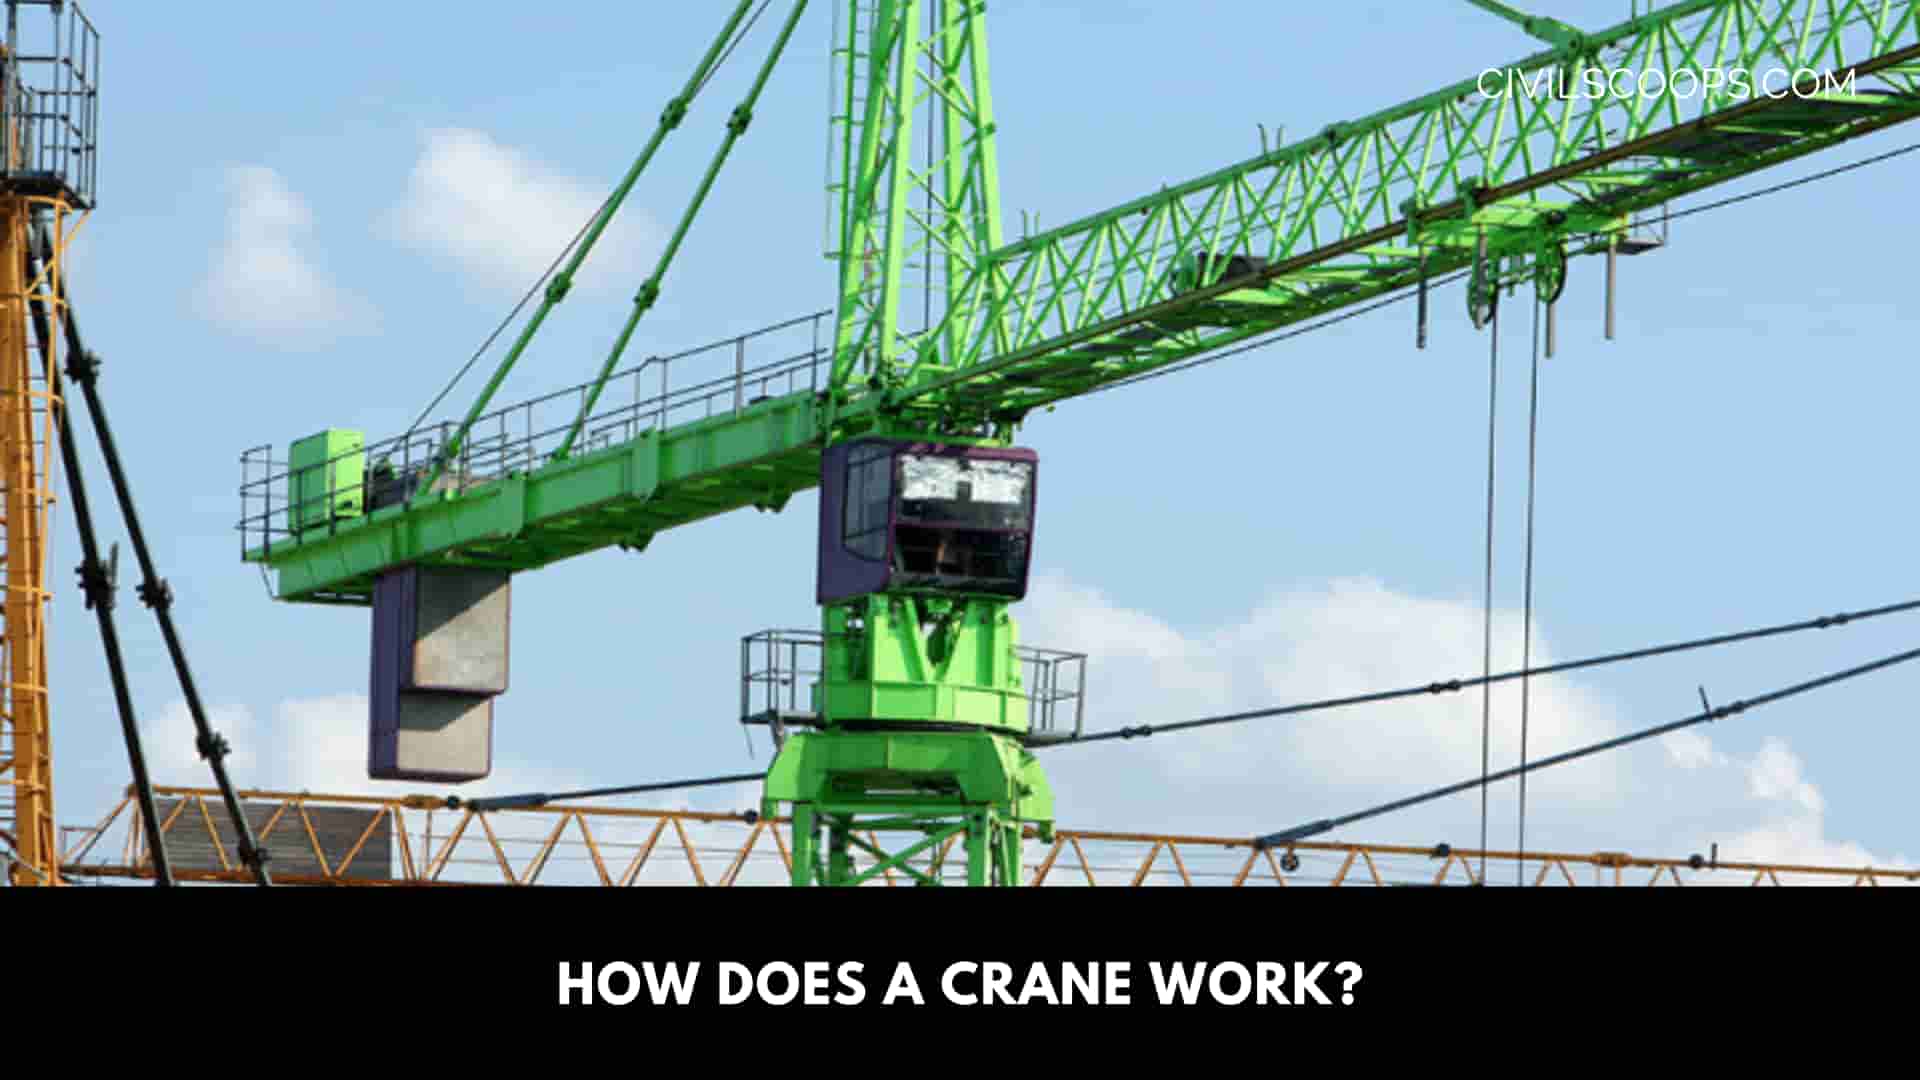 How Does a Crane Work